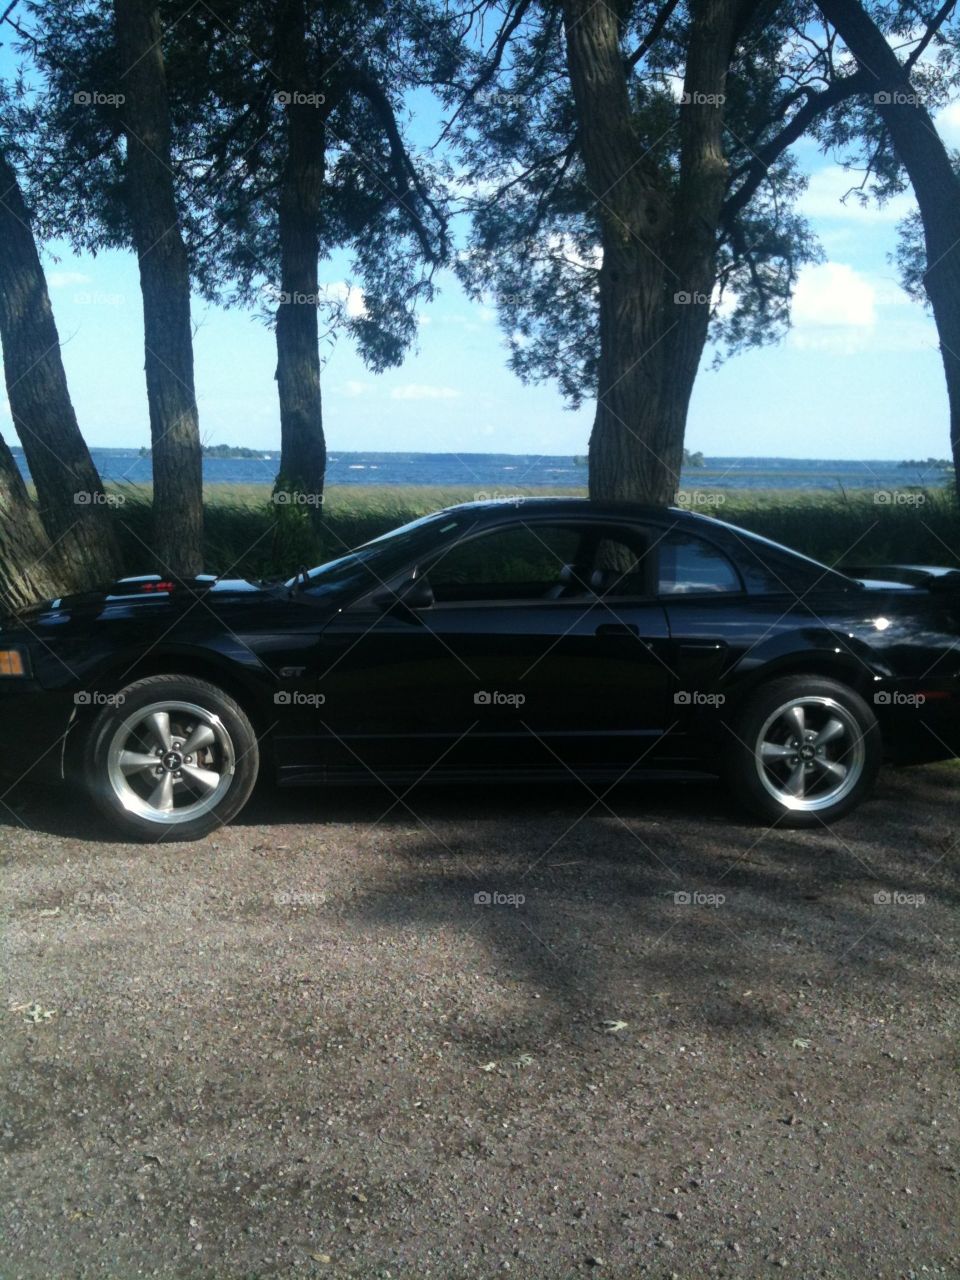 Black Beauty. Pic of our 2002 Ford Mustang GT